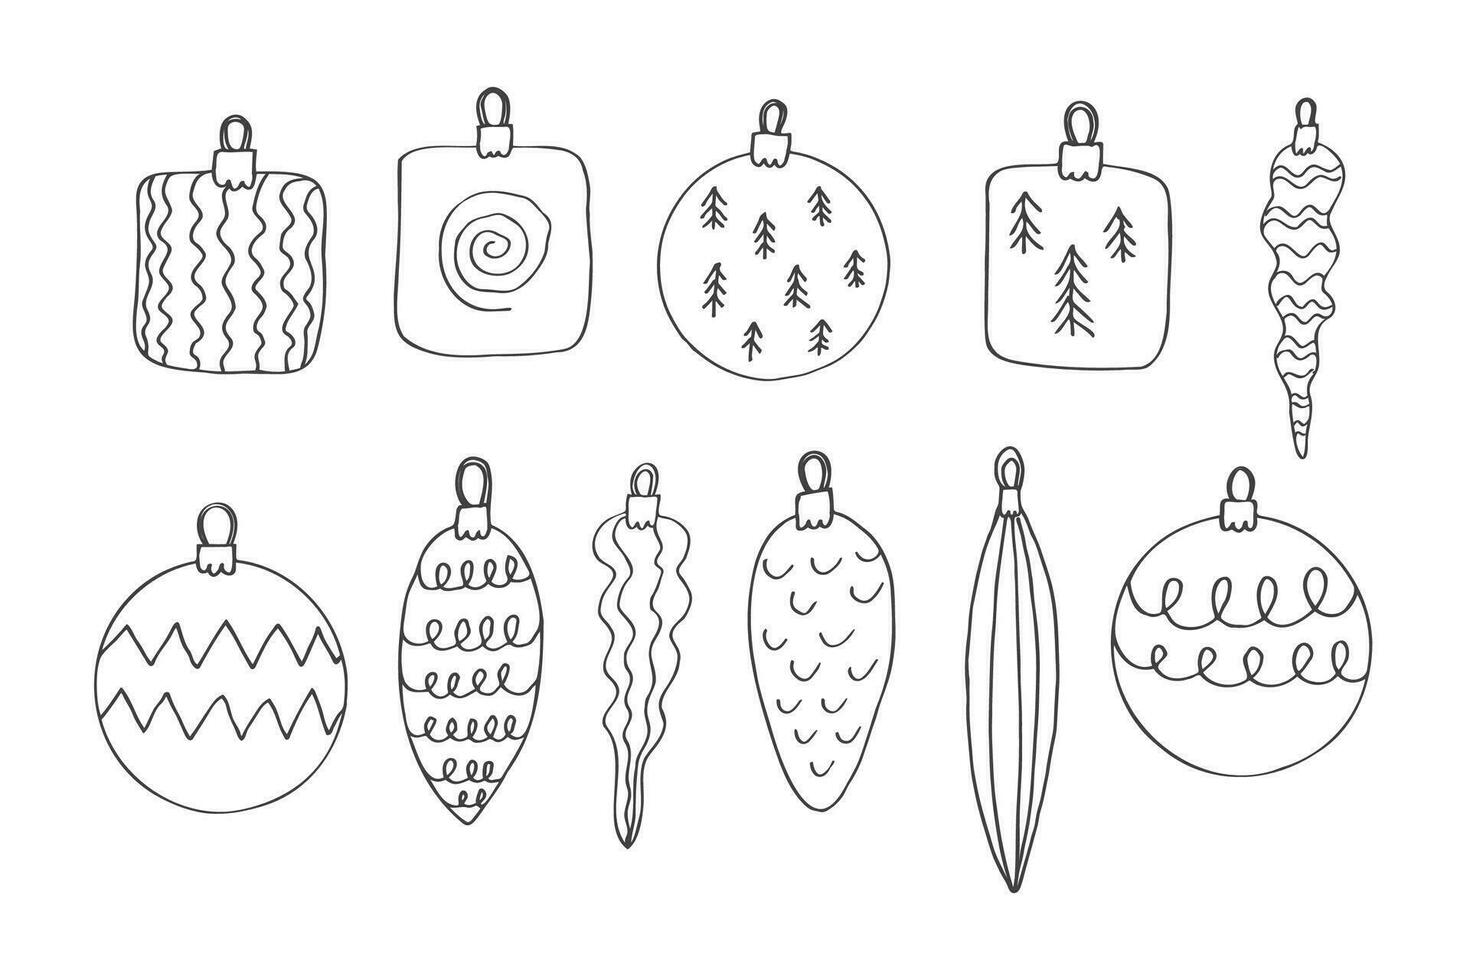 Christmas toys doodle set minimalist style vector illustration. Ink drawn festive toy balls template for congratulations winter holidays. Boho style background design element for print, card, paper